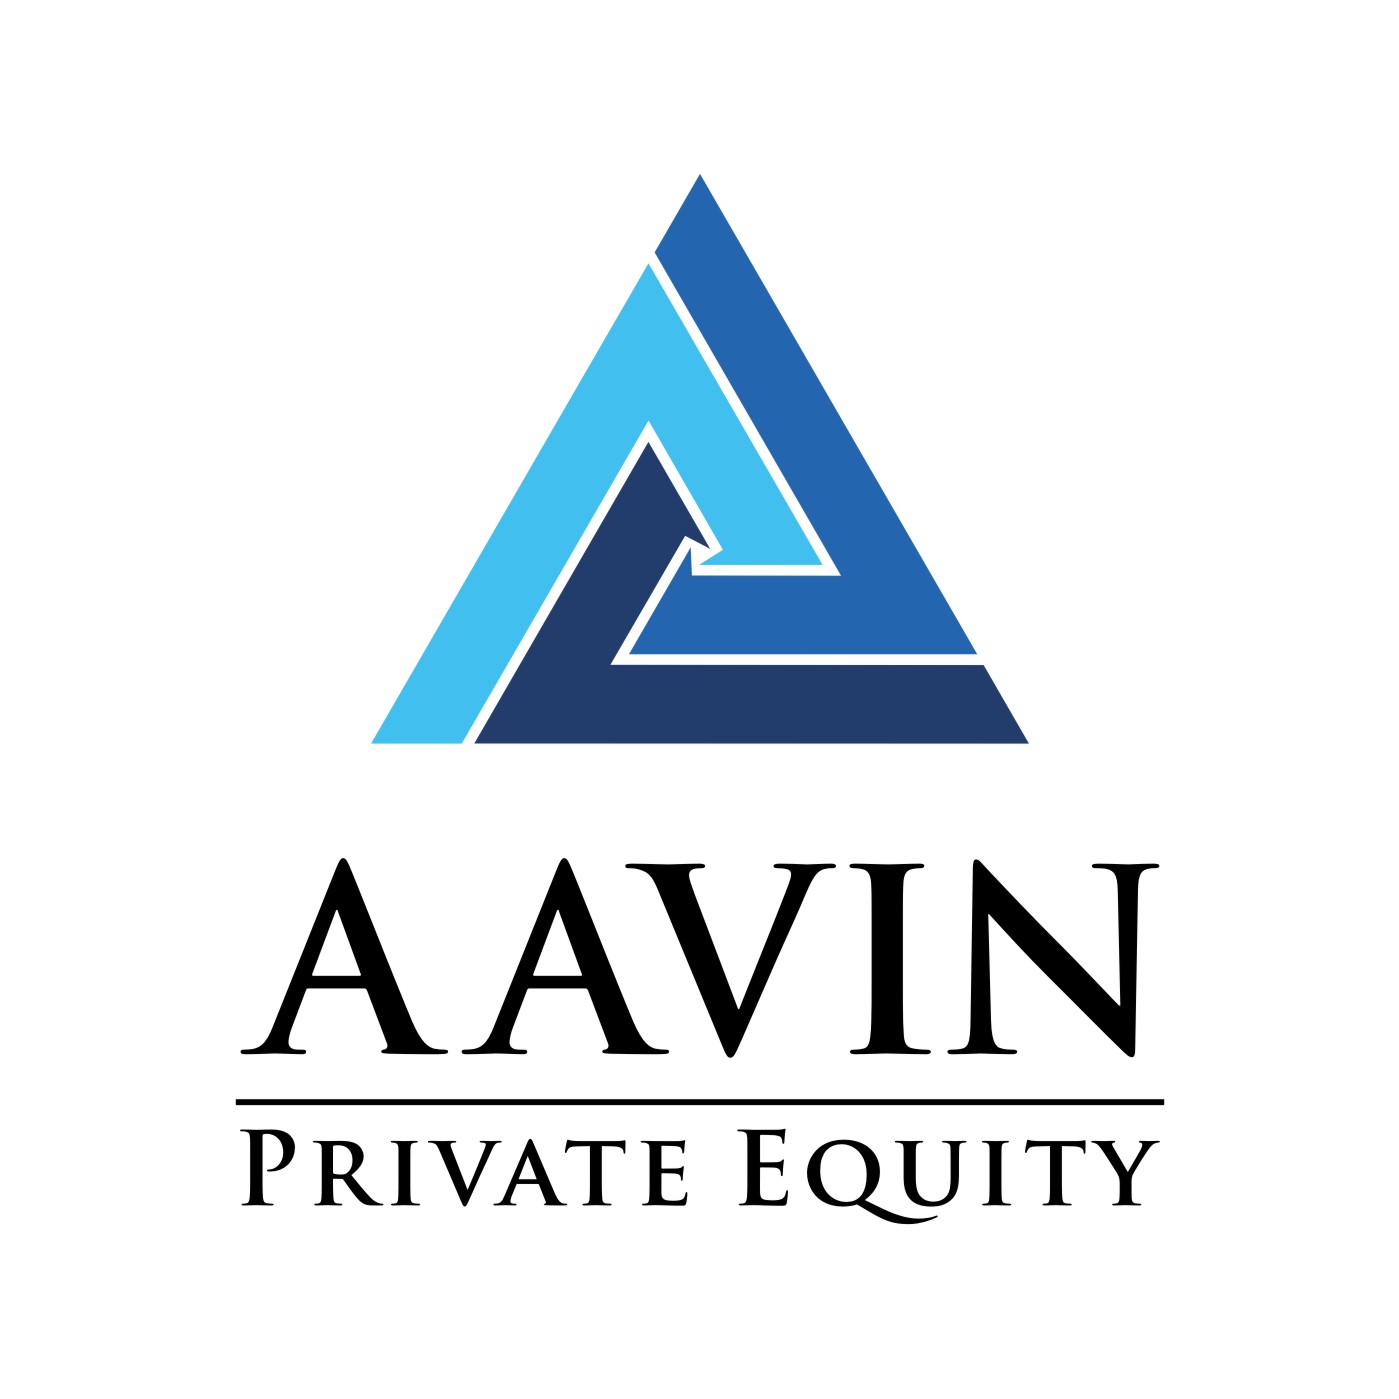 Aavin Private Equity